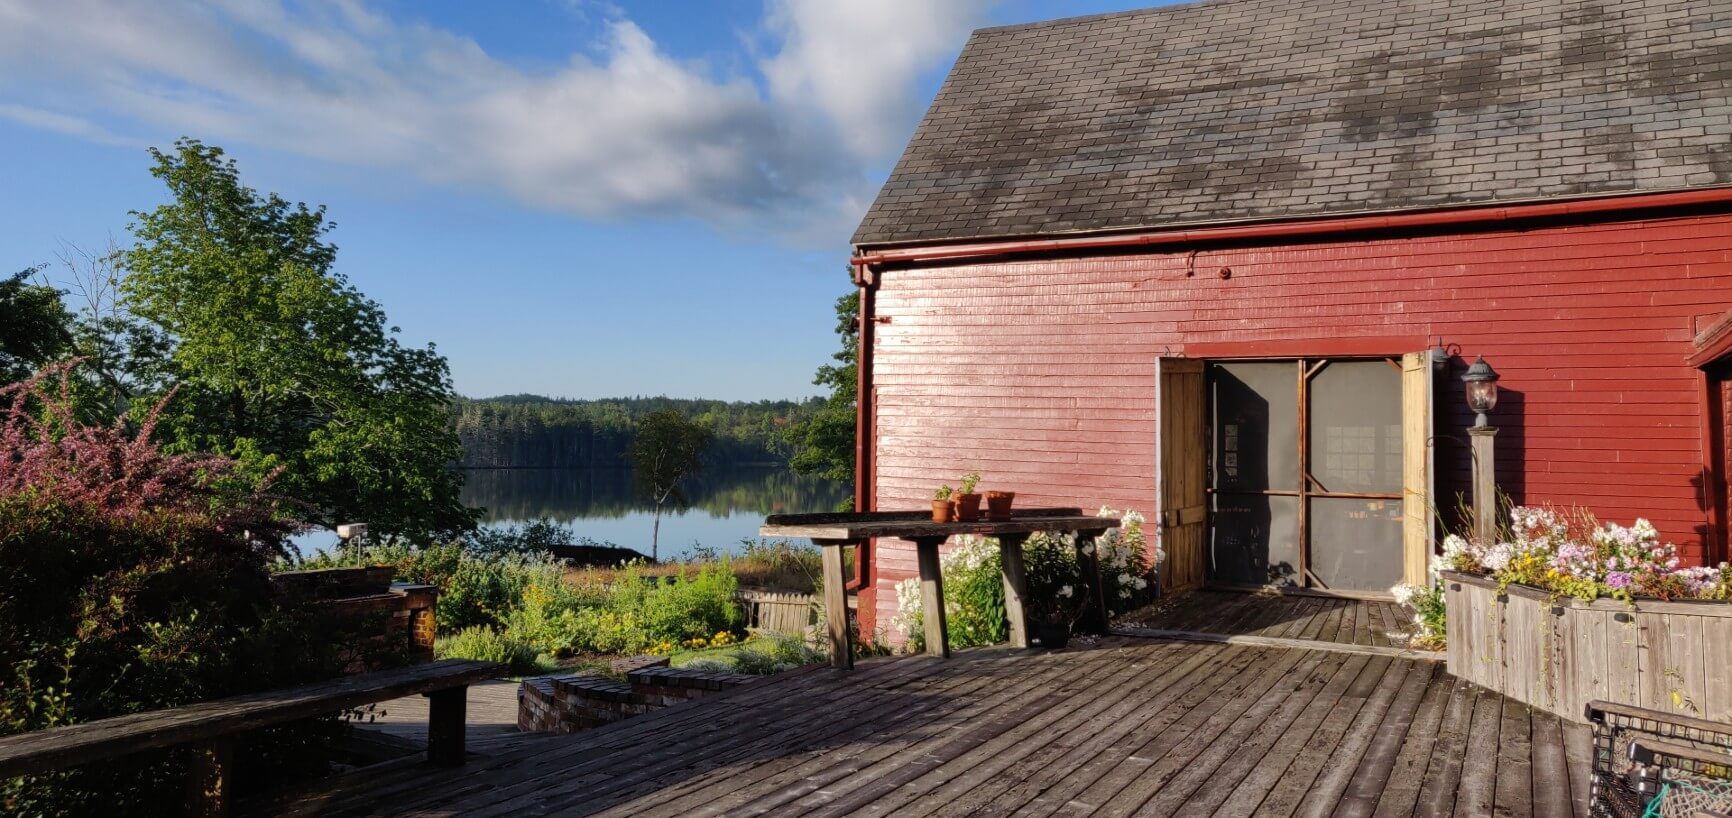 Red barn with doors open, deck, expansive gardens with view of water and trees beyond